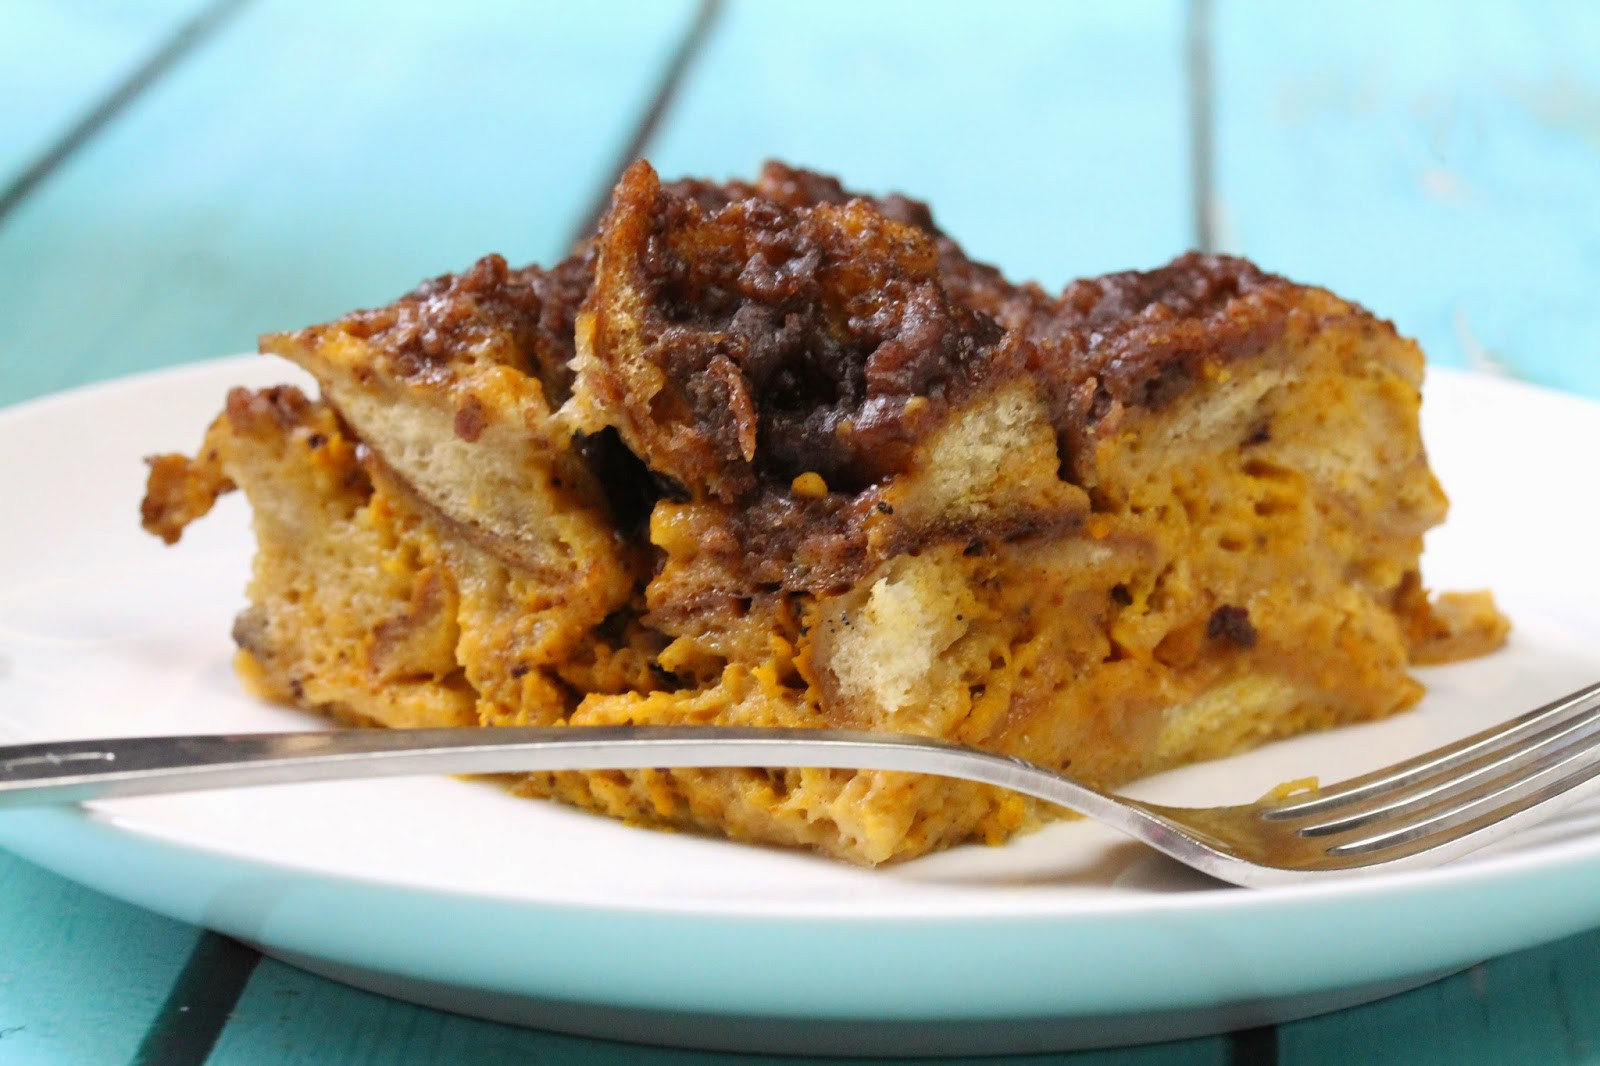 Slow Cooker French Toast Overnight
 Slow Cooker Overnight Pumpkin French Toast Casserole